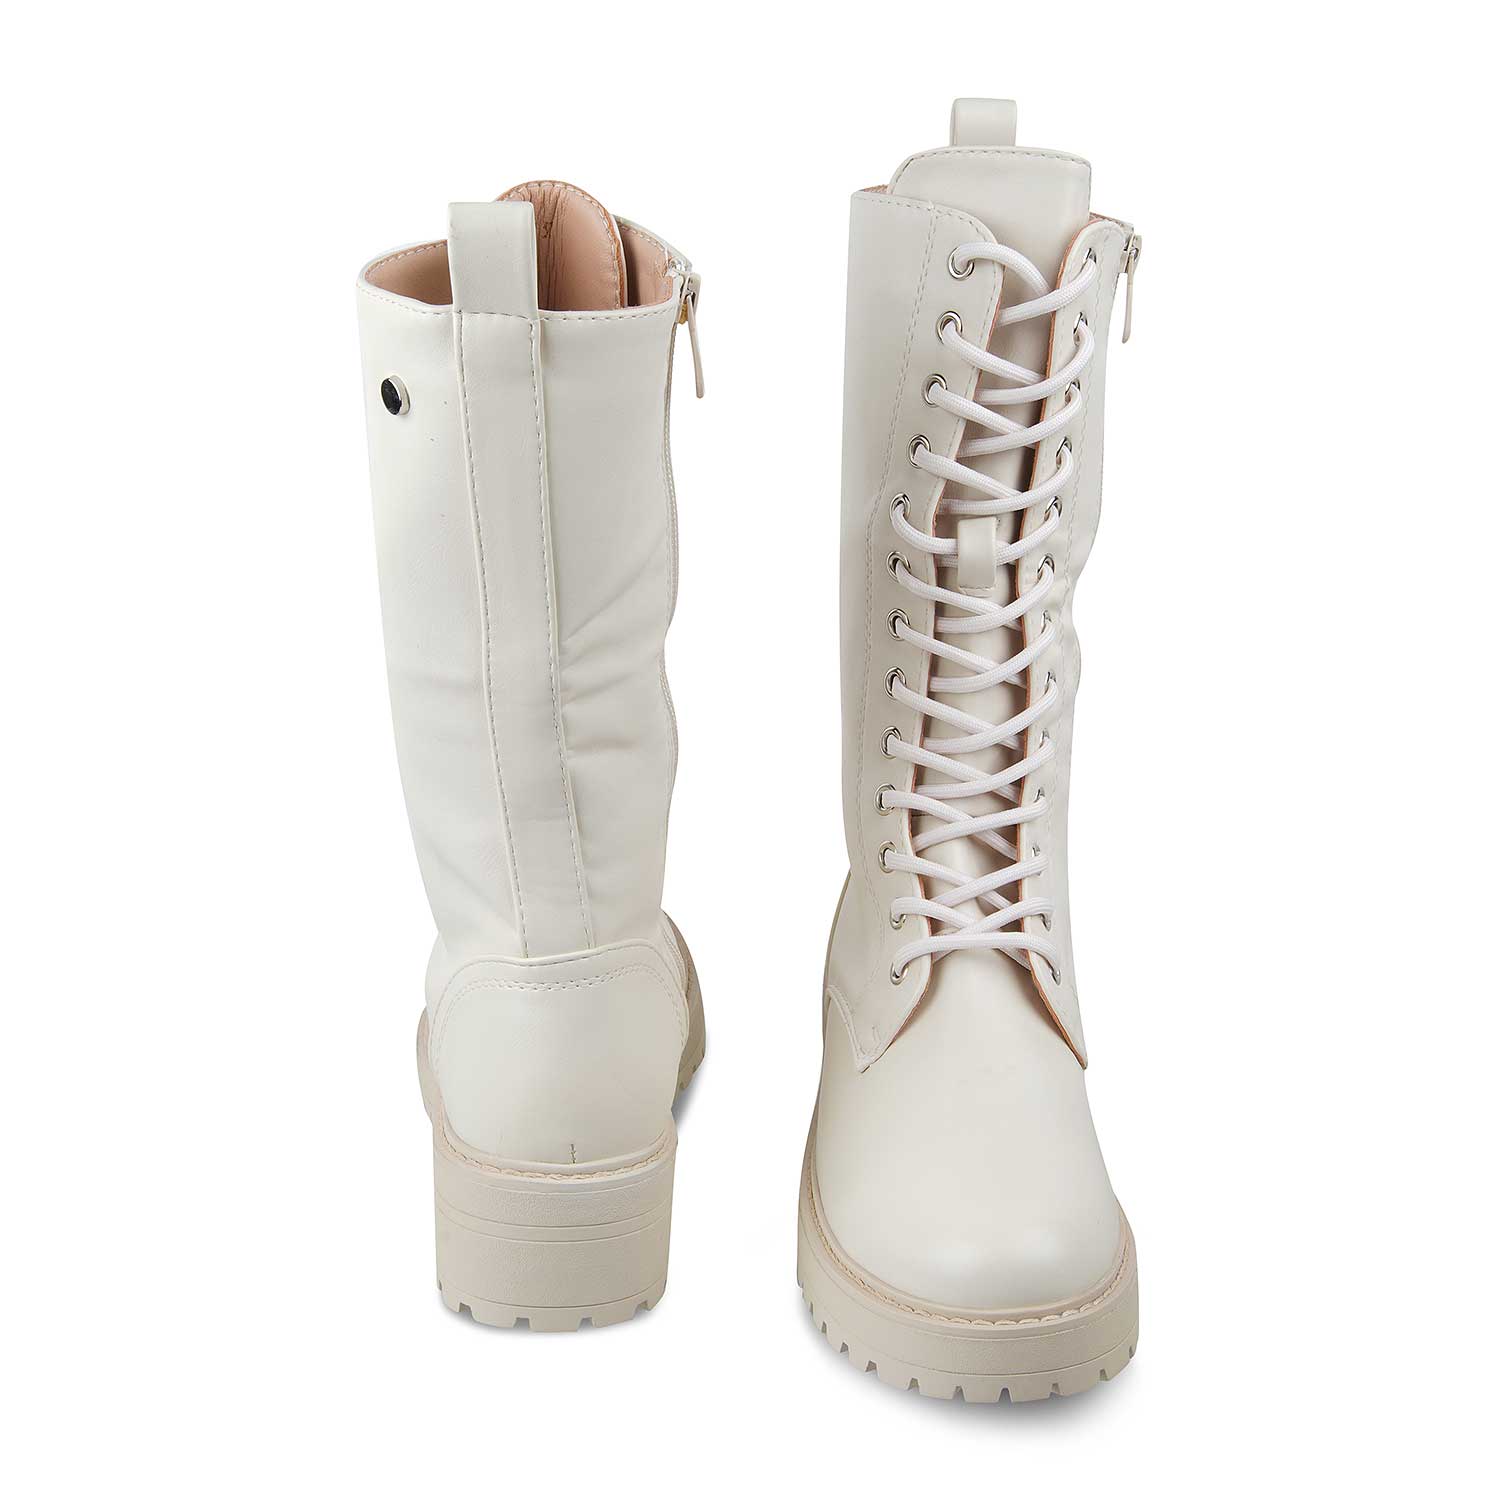 The White Beige Women's Knee-length Boots Tresmode